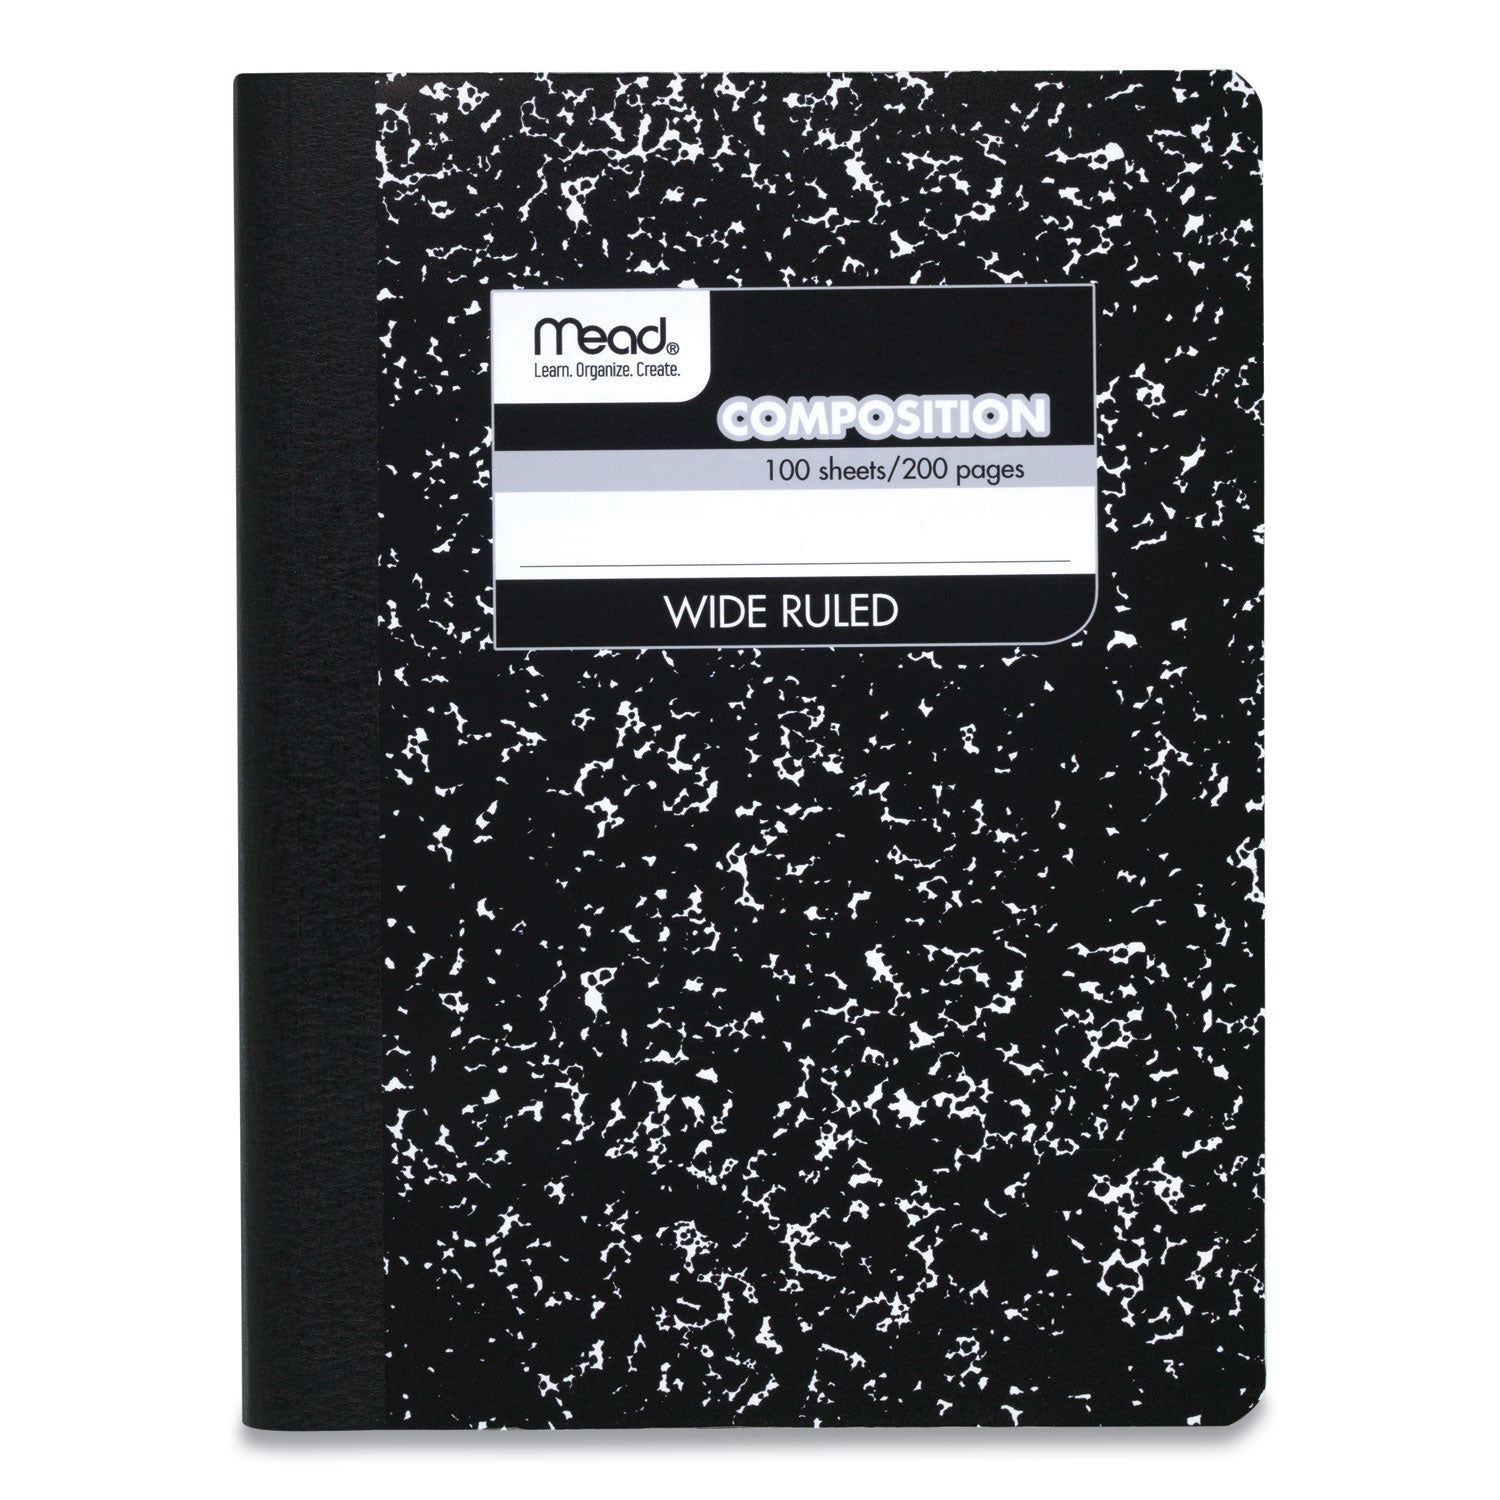 square-deal-composition-book-3-subject-wide-legal-rule-black-cover-100-975-x-75-sheets-12-pack_mea72936 - 2